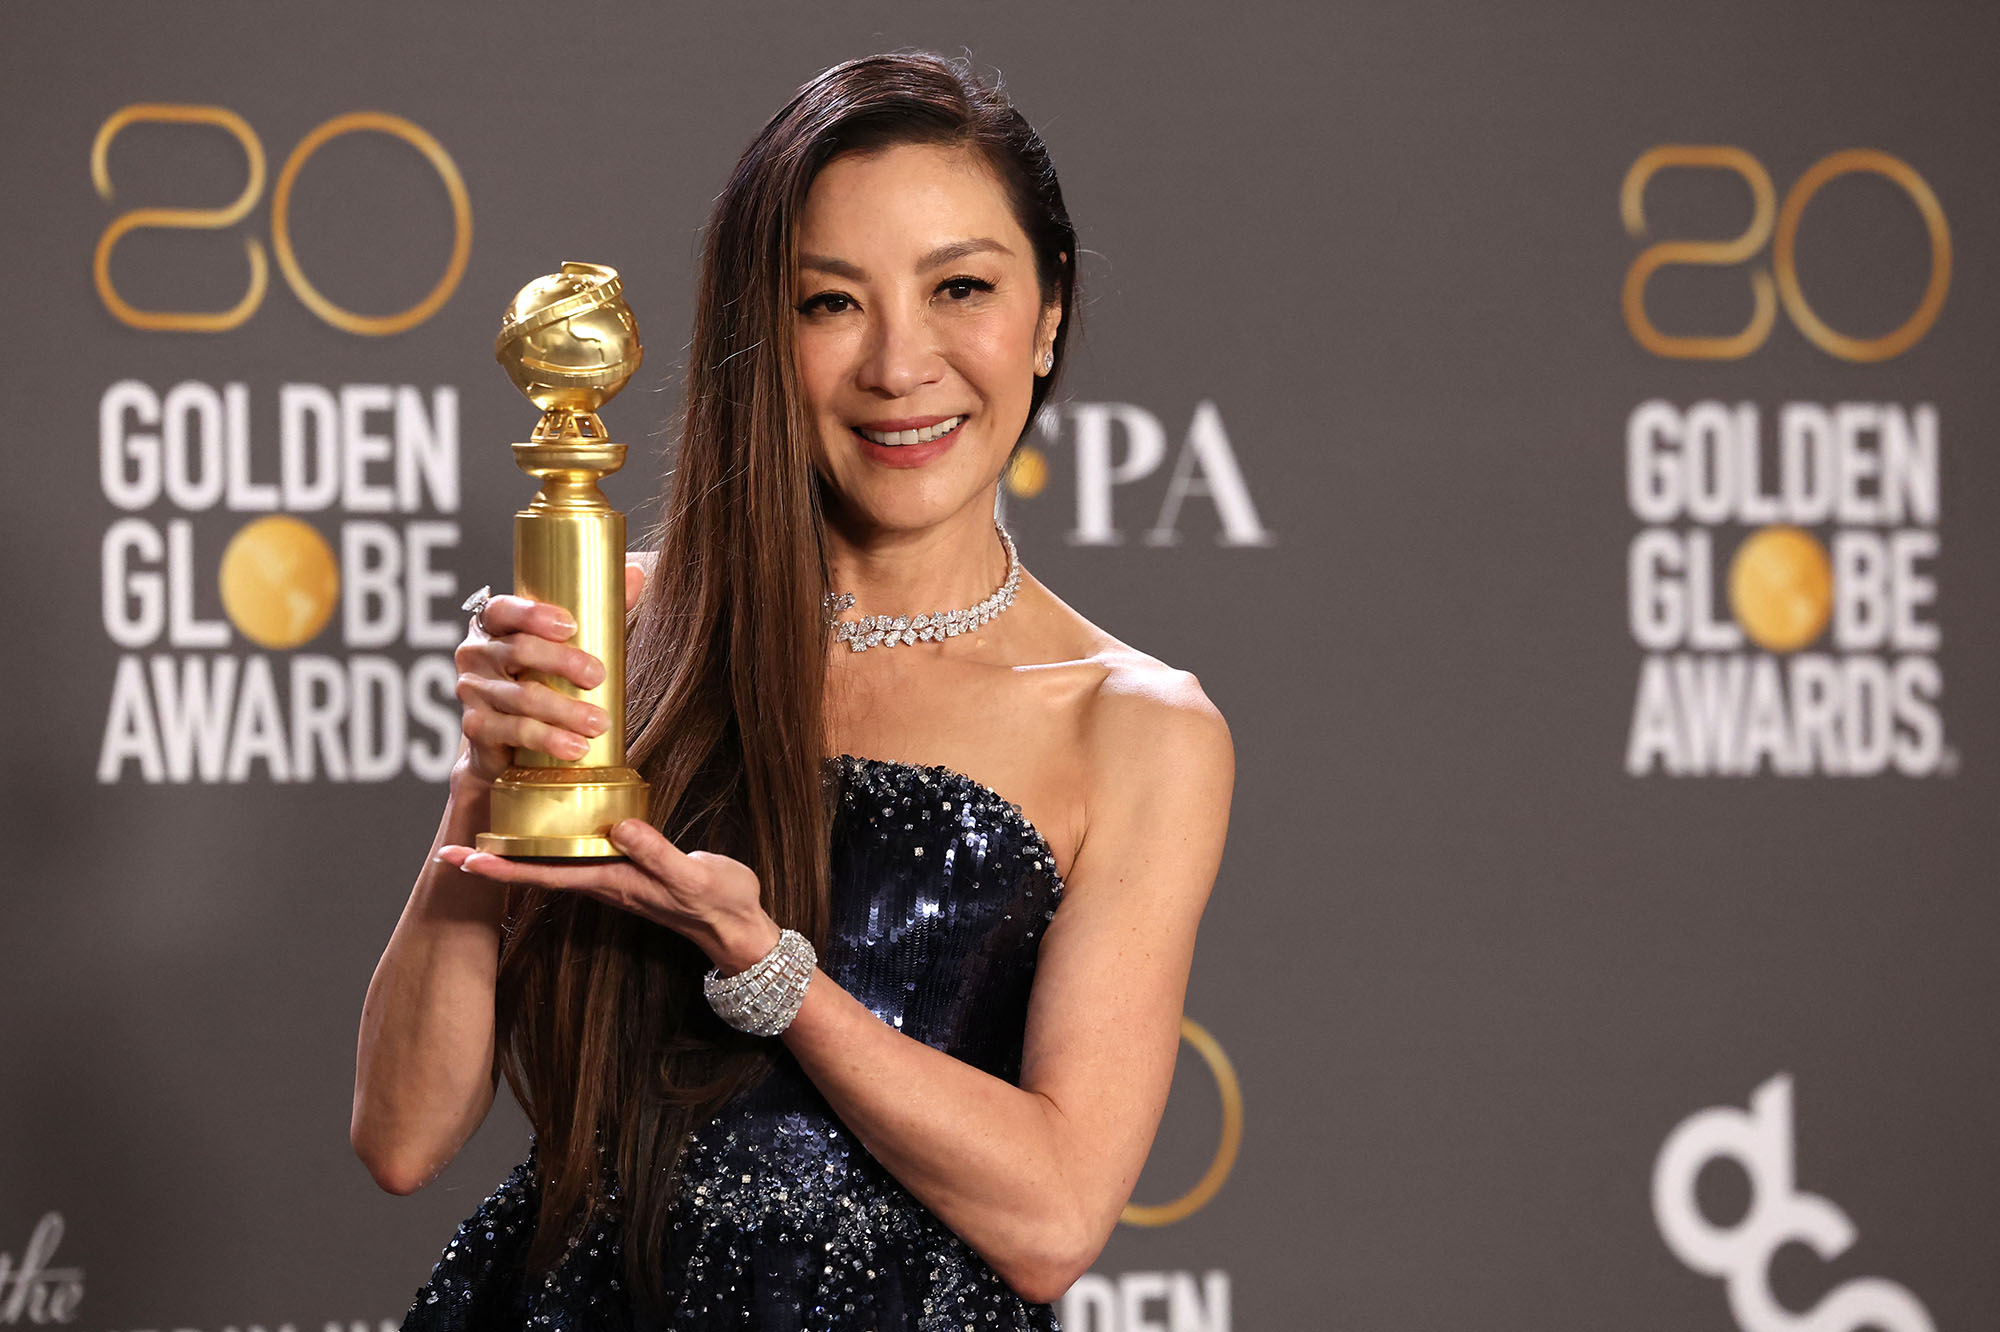 Michelle Yeoh poses with her award for Best Actress in a Musical or Comedy Motion Picture for "Everything Everywhere All at Once" at the 80th Annual Golden Globe Awards in Beverly Hills, California, U.S., January 10, 2023. REUTERS/Mario Anzuoni